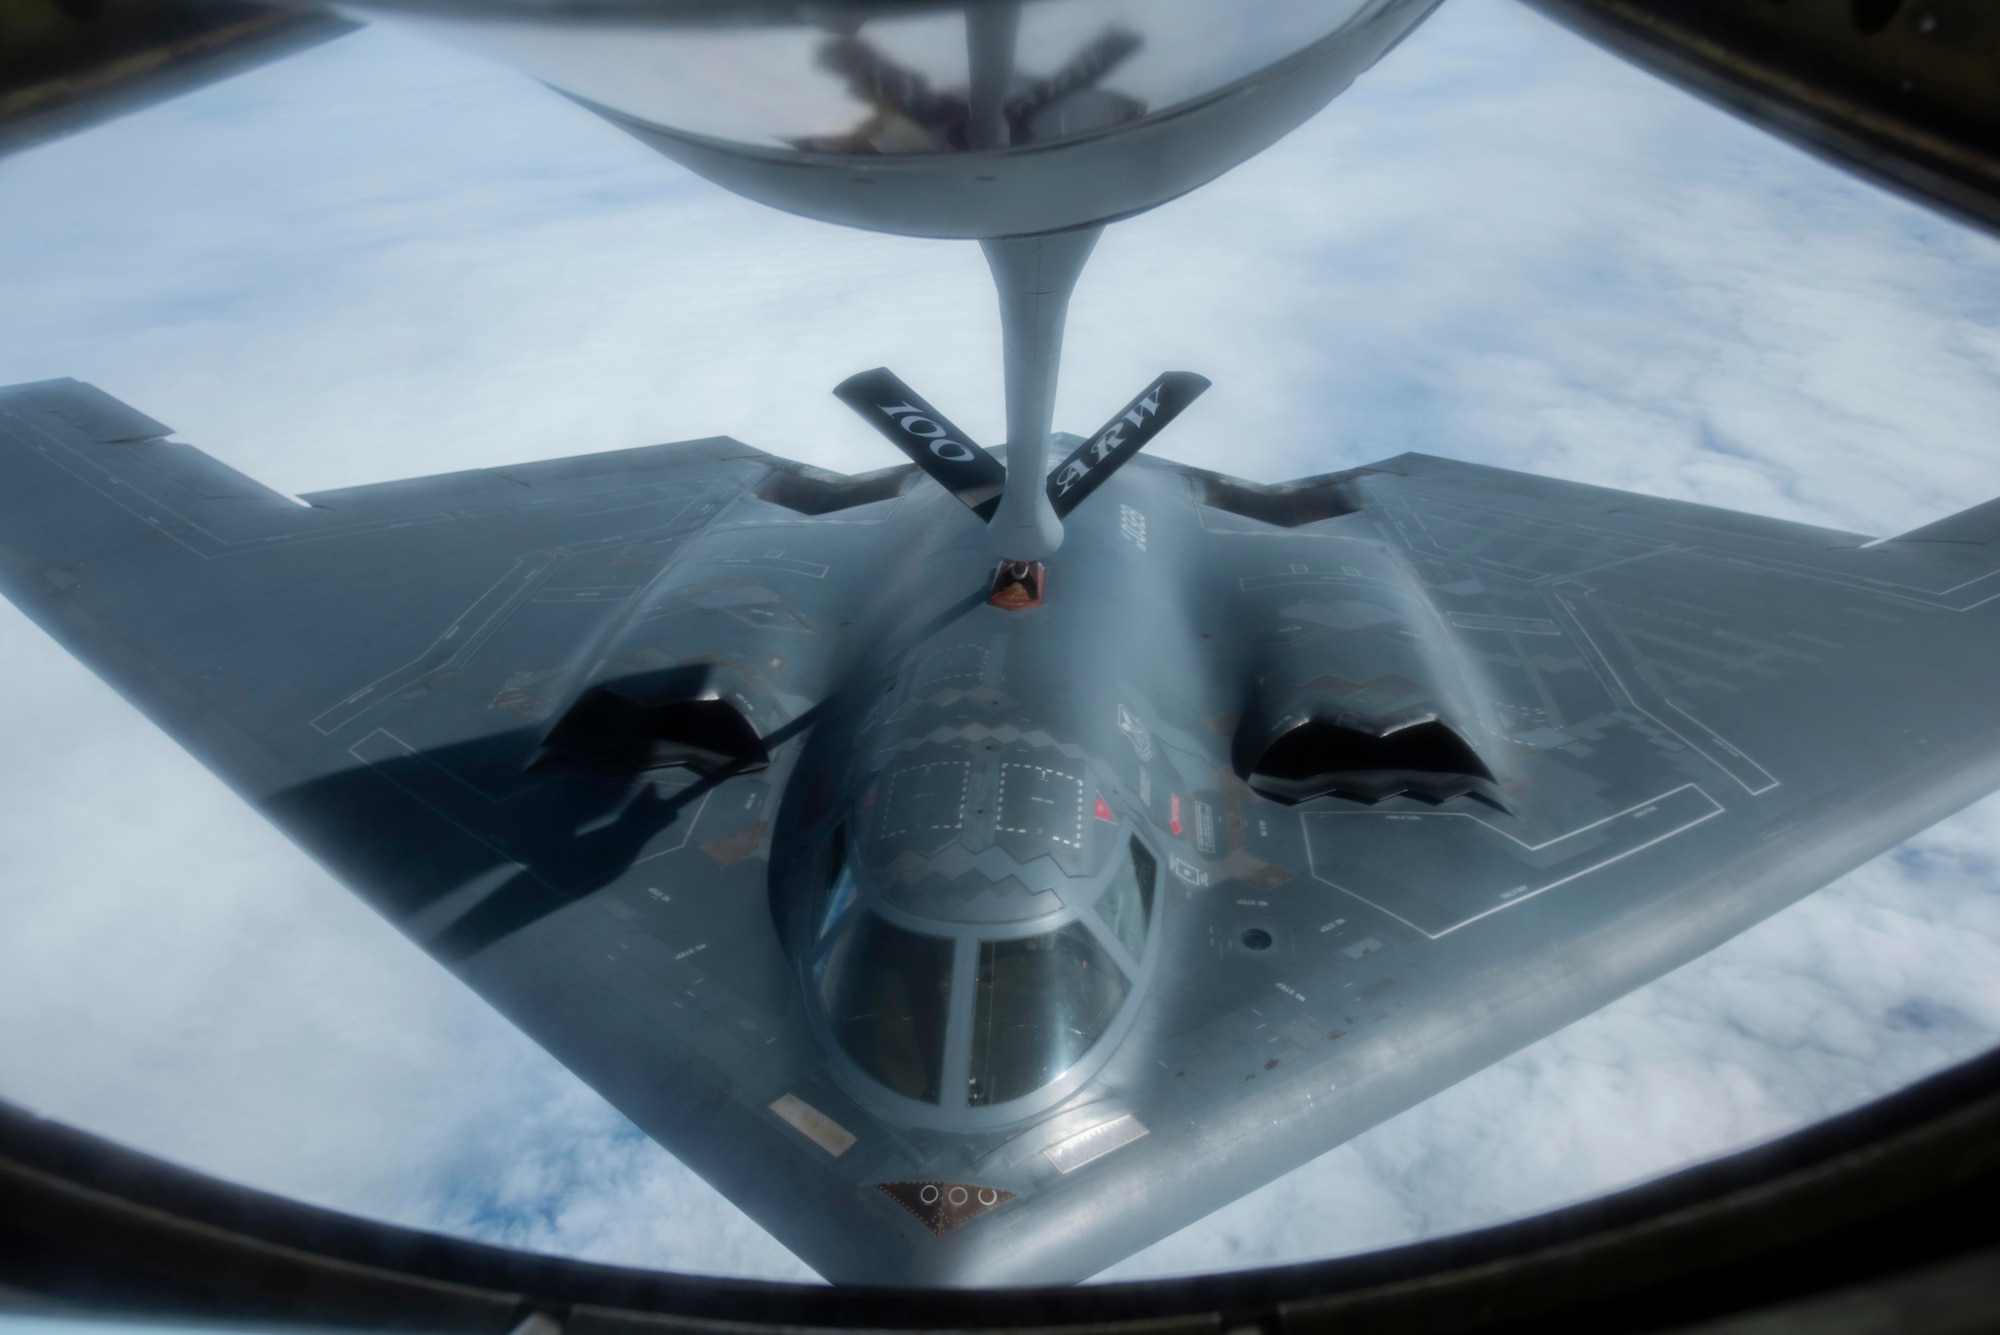 A B-2 Spirit assigned to the 509th Bomb Wing at Whiteman Air Force Base, Missouri, receives fuel from a KC-135 Stratotanker assigned to the 100th Air Refueling Wing at RAF Mildenhall, England, over the North Sea June 18, 2020. The aerial refueling was conducted in support of a strategic bomber mission north of the Arctic Circle. (U.S. Air Force photo by Airman 1st Class Joseph Barron)